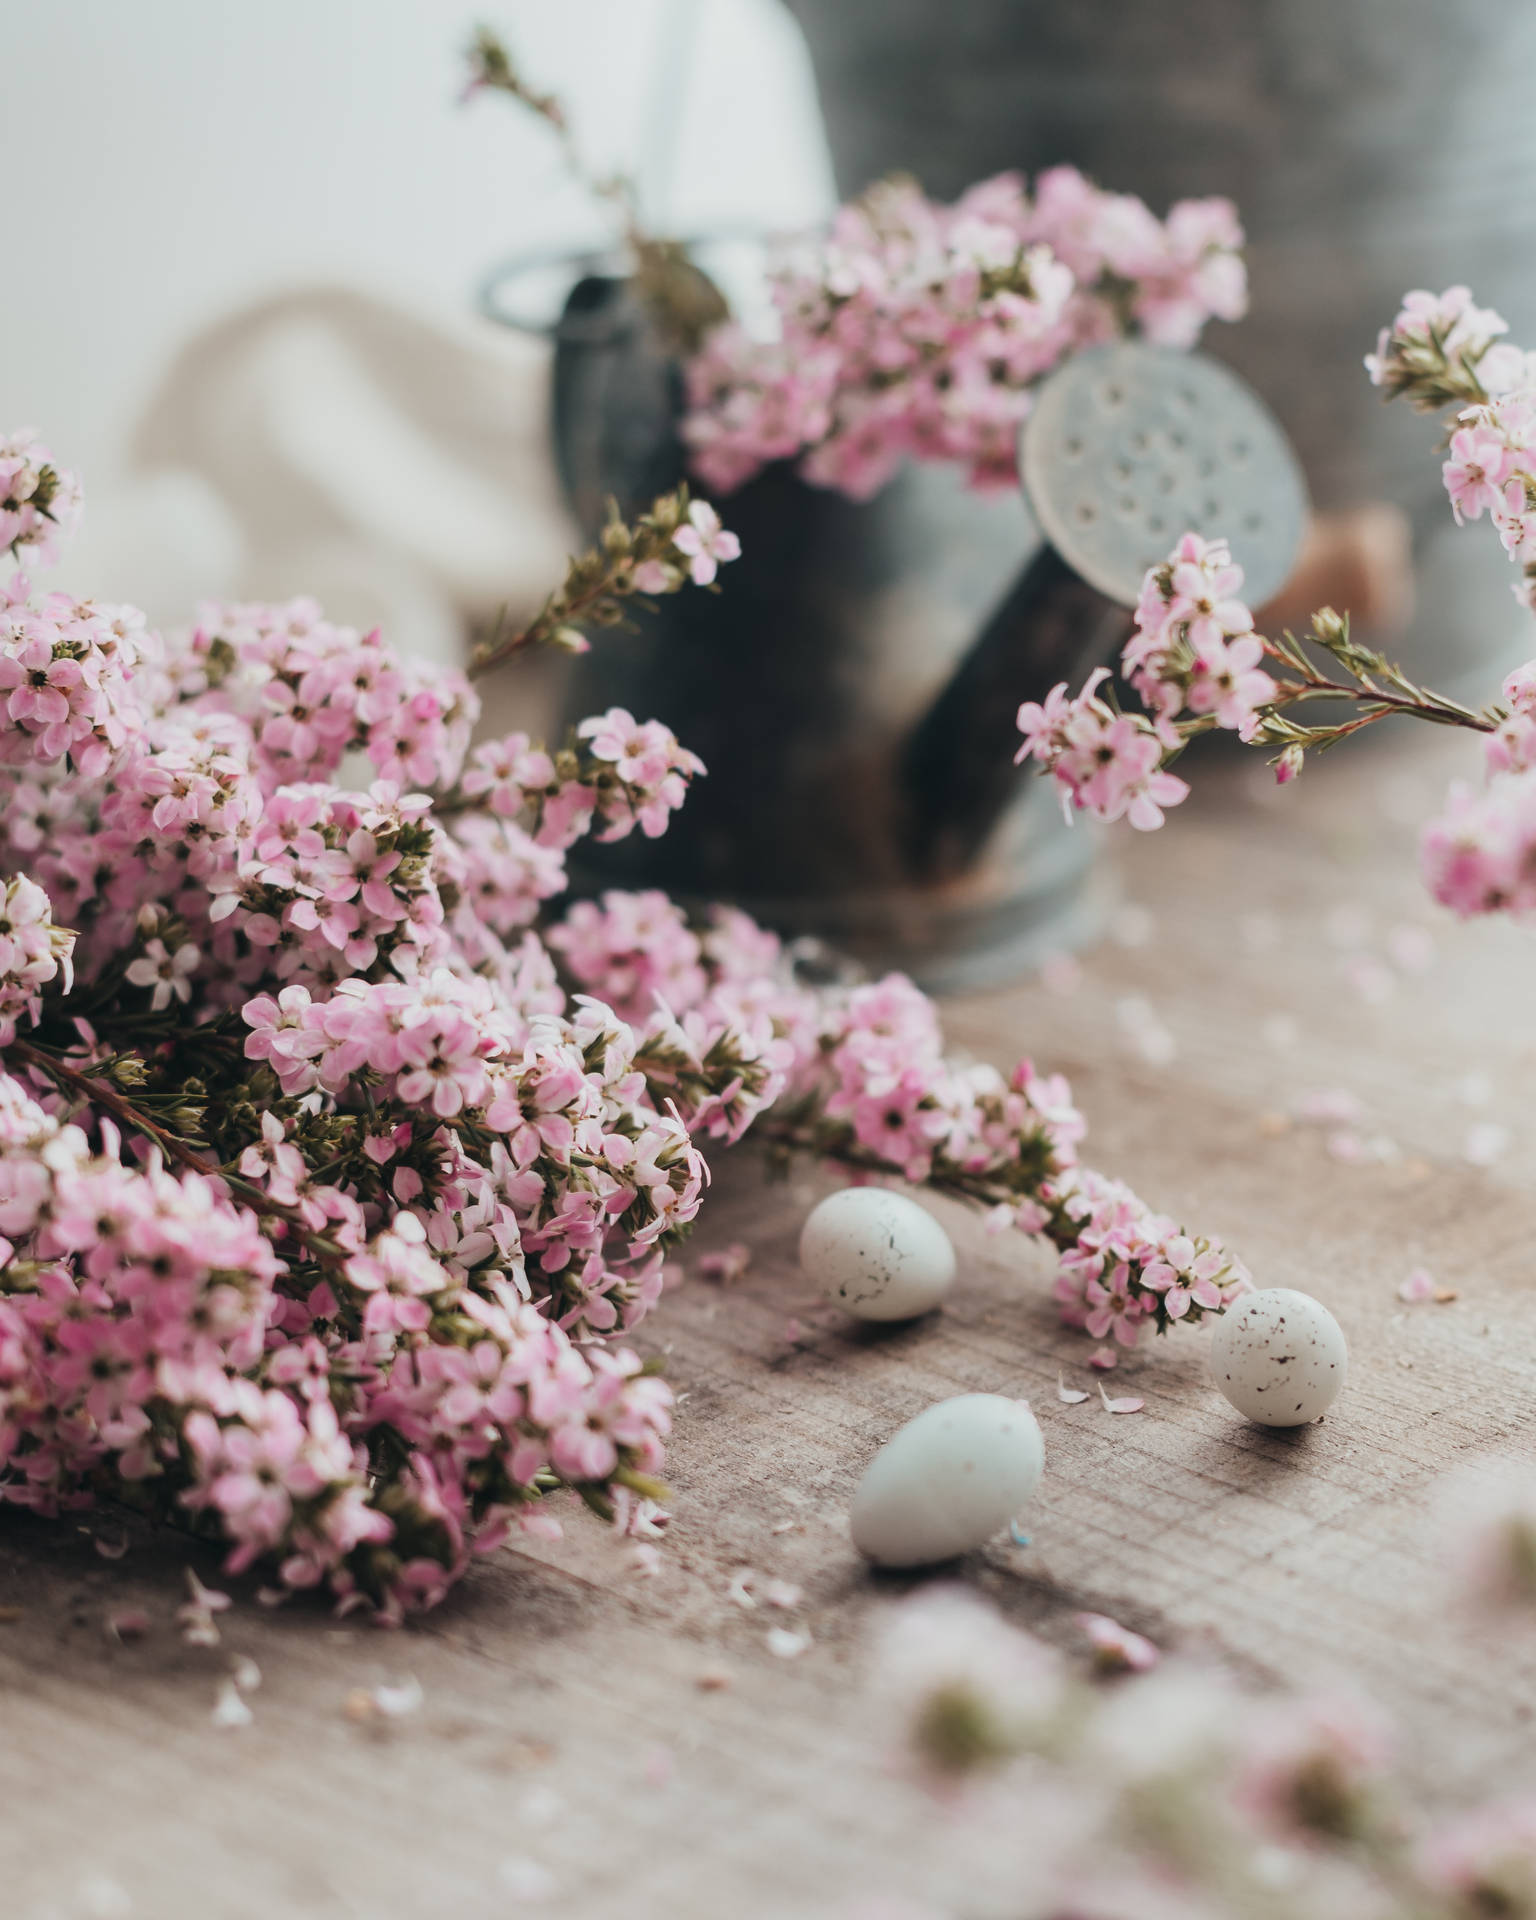 "Beautiful pink flowers and Easter quail eggs bring in the cheerful celebration of Easter." Wallpaper